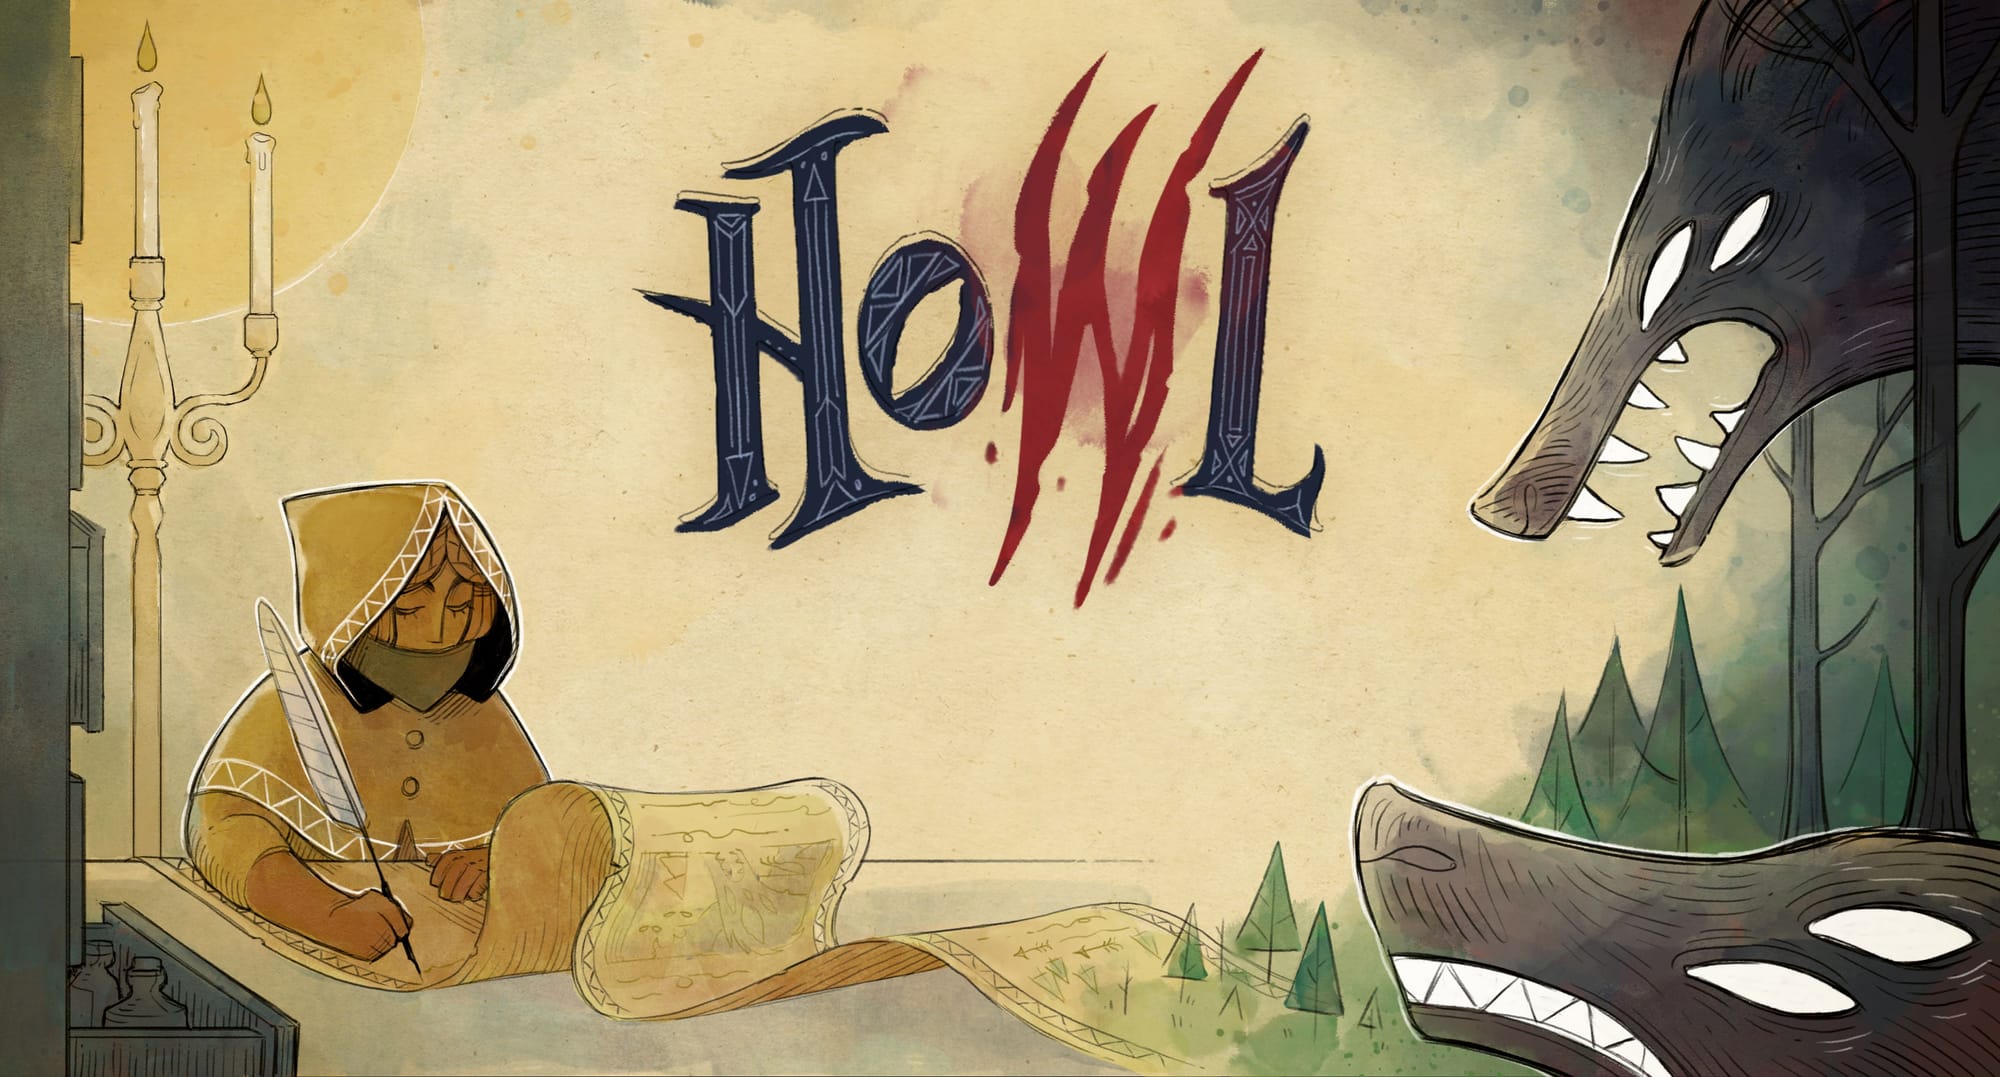 Howl - Switch Review